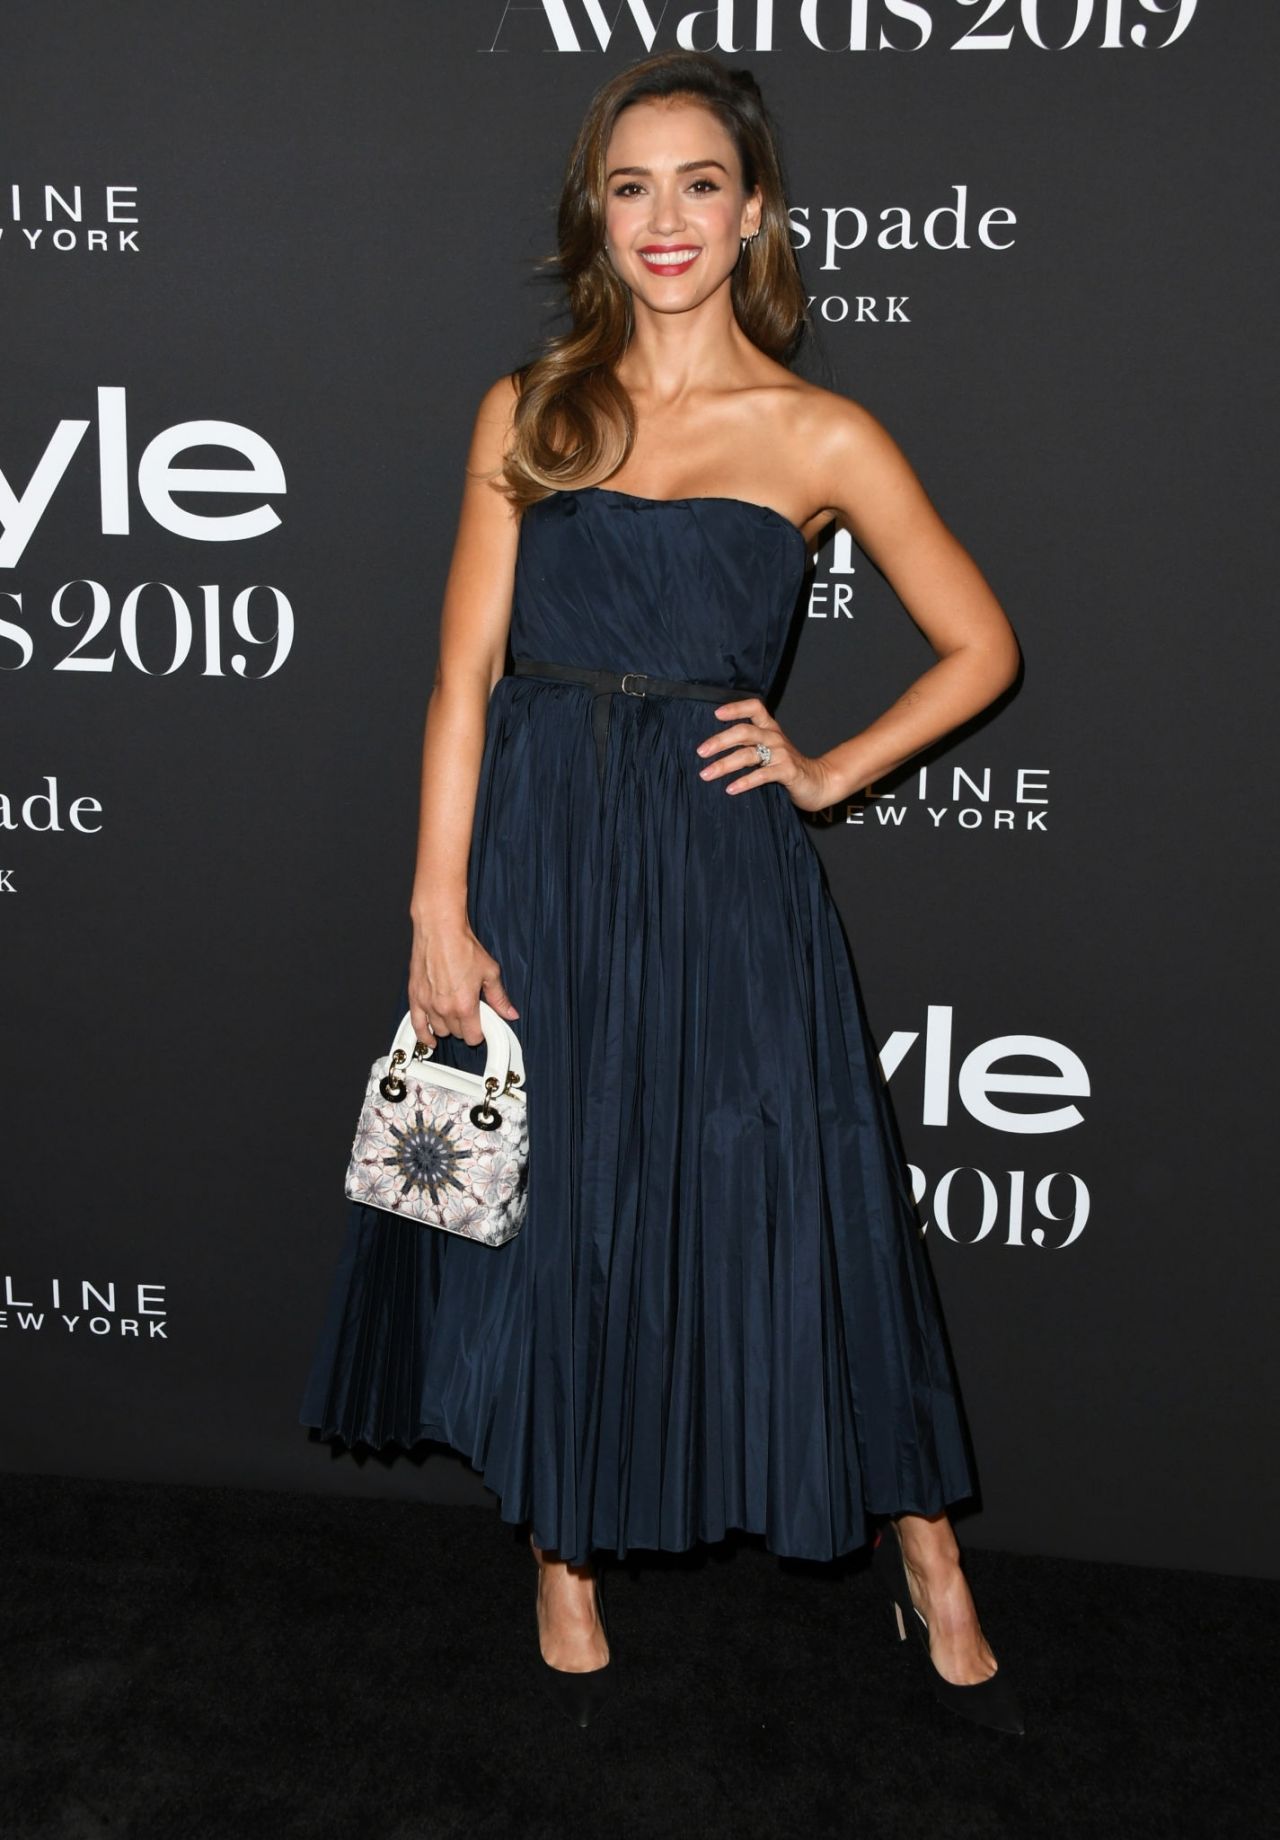 Jessica Alba gorgeous and glowing at 2019 Instyle Awards